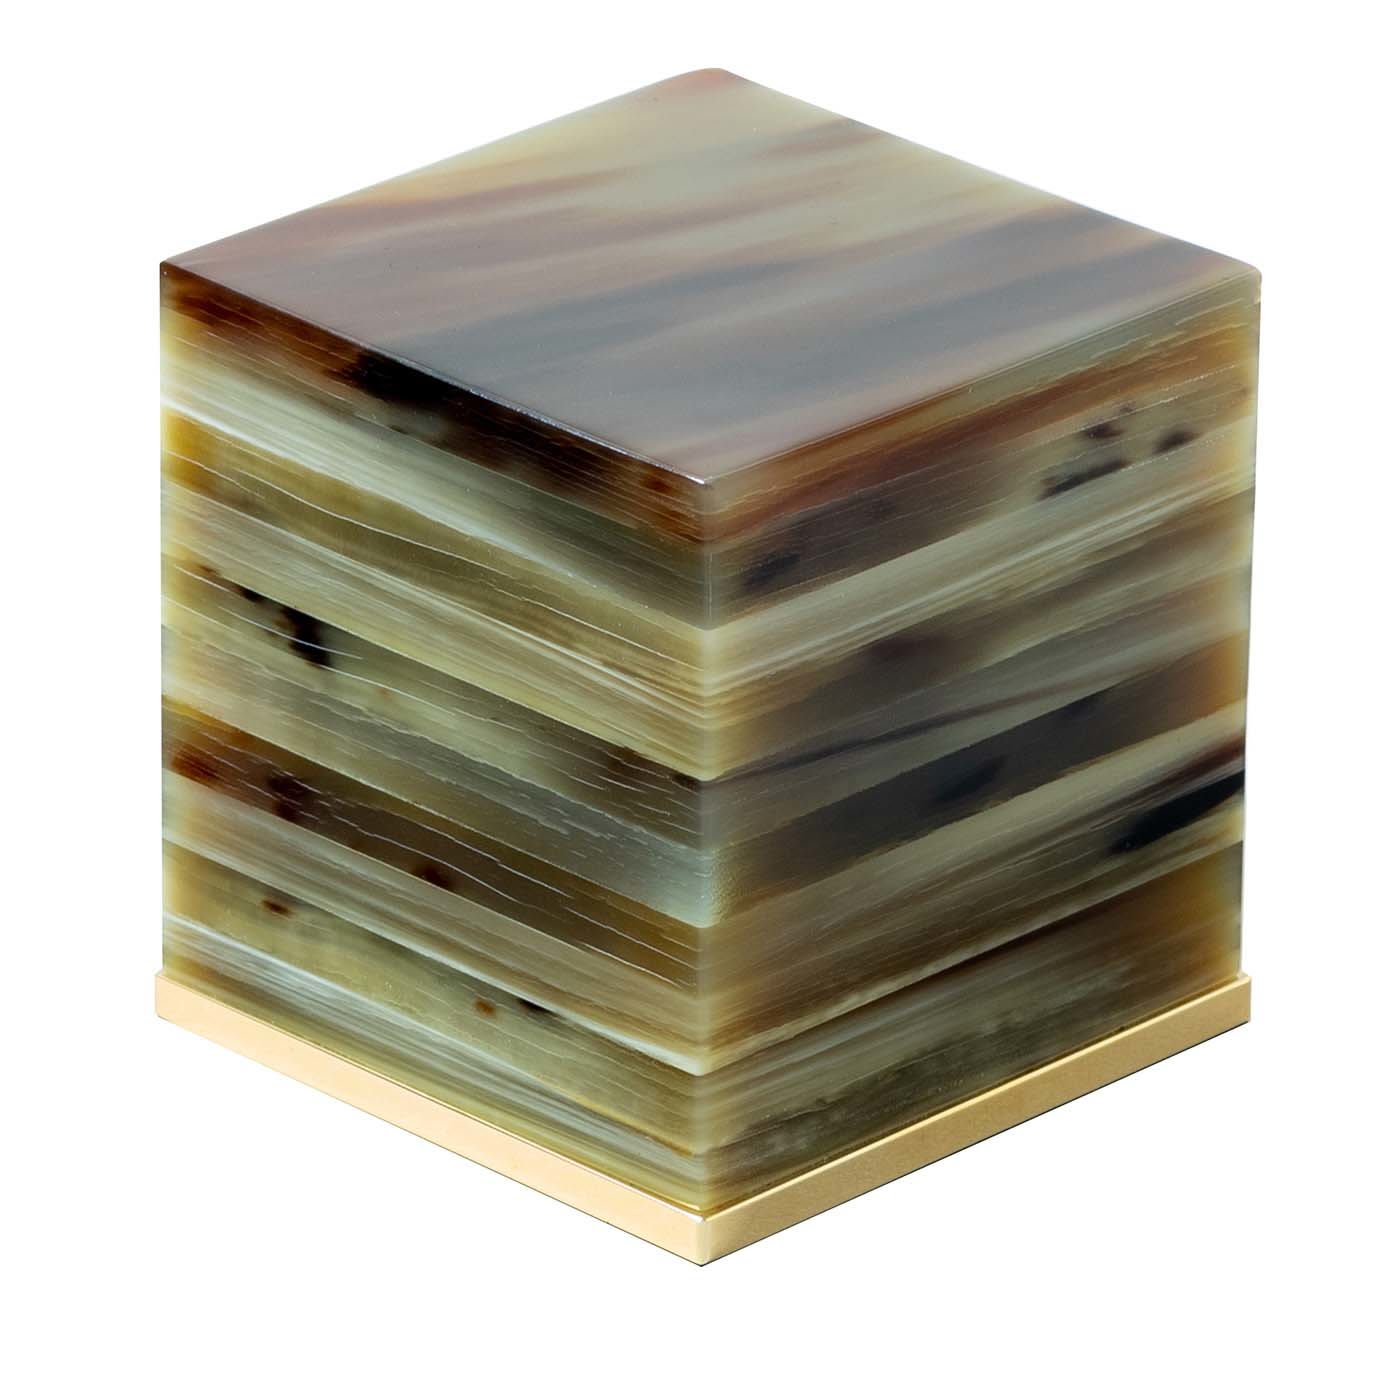 Cube Paperweight in Natural Horn - Zanchi 1952